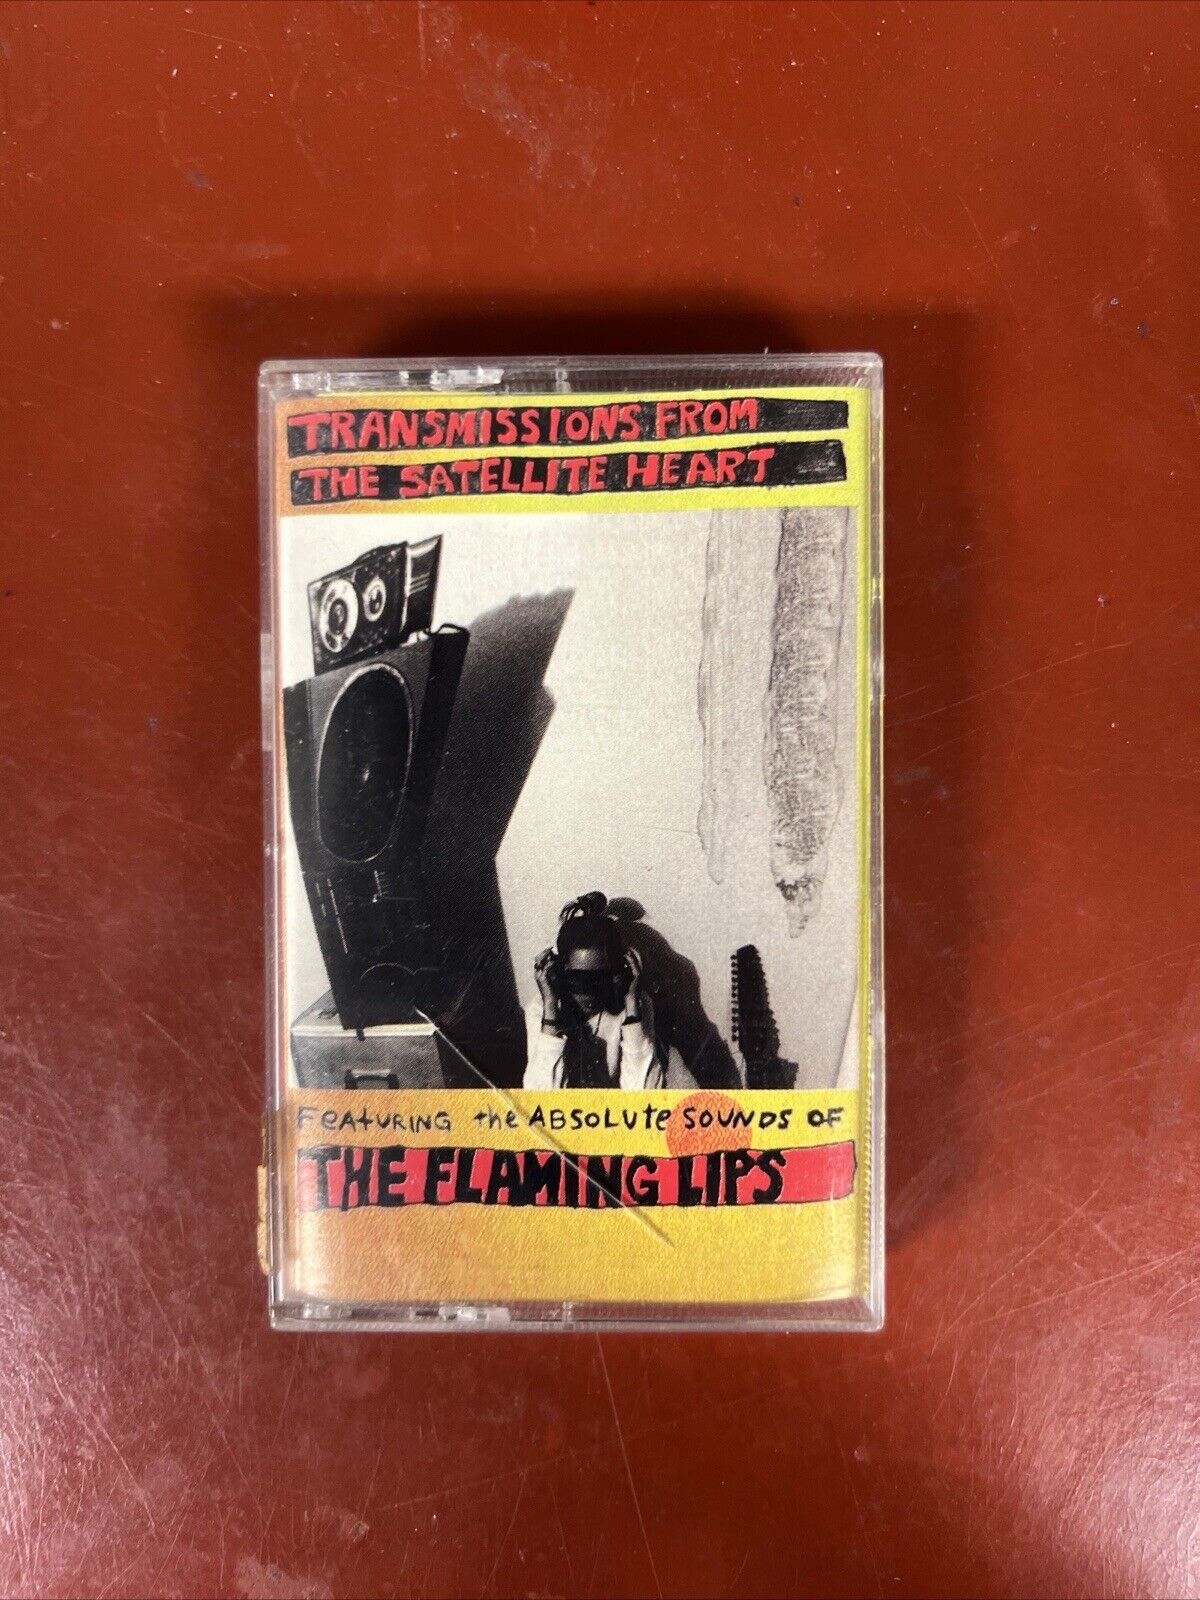 Transmissions from the Satellite Heart by The Flaming Lips (Cassette, Jun-1993,